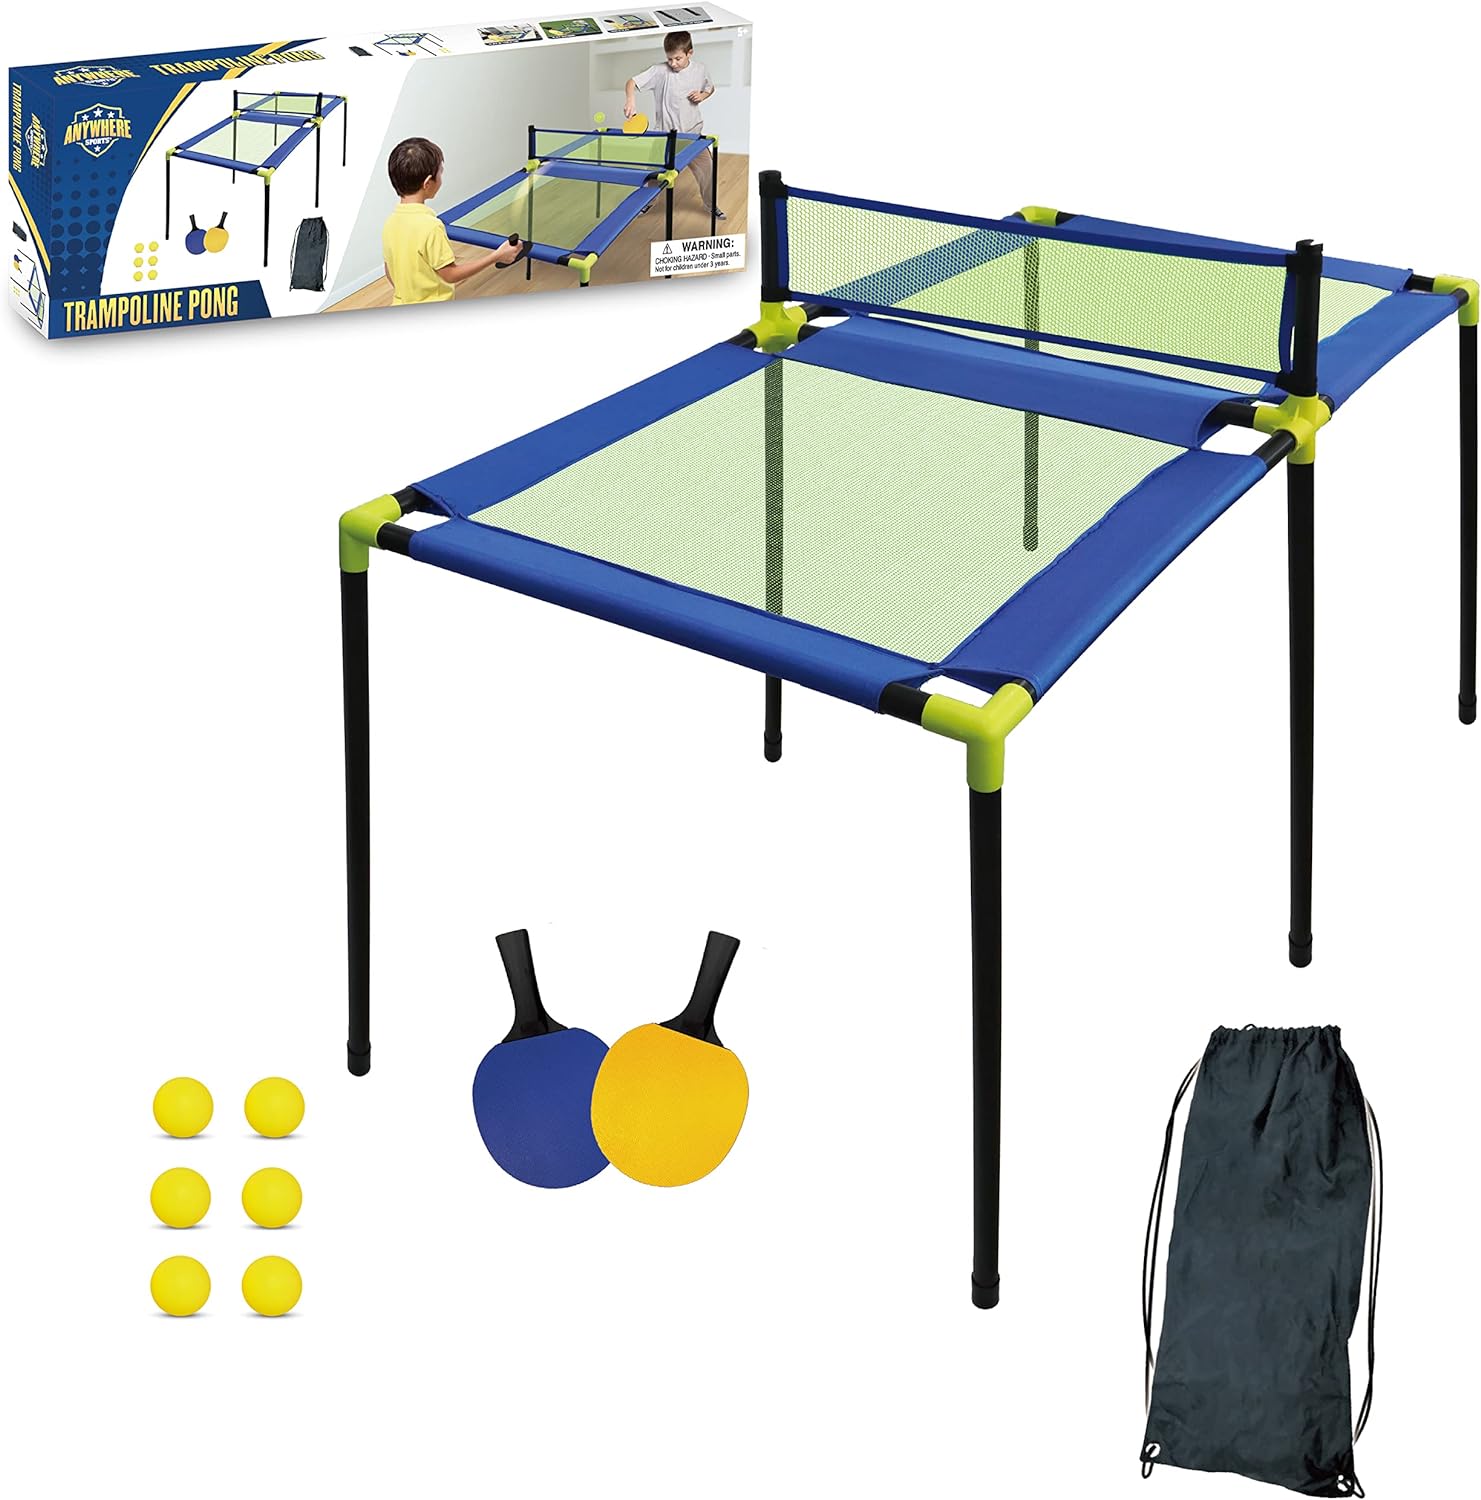 Anywhere Sports – Portable Trampoline Ping Pong Table Tennis Game for Indoor or Outdoor Use, Includes Two Paddles, Six Balls, Storage Bag, and Complete Table for Kids